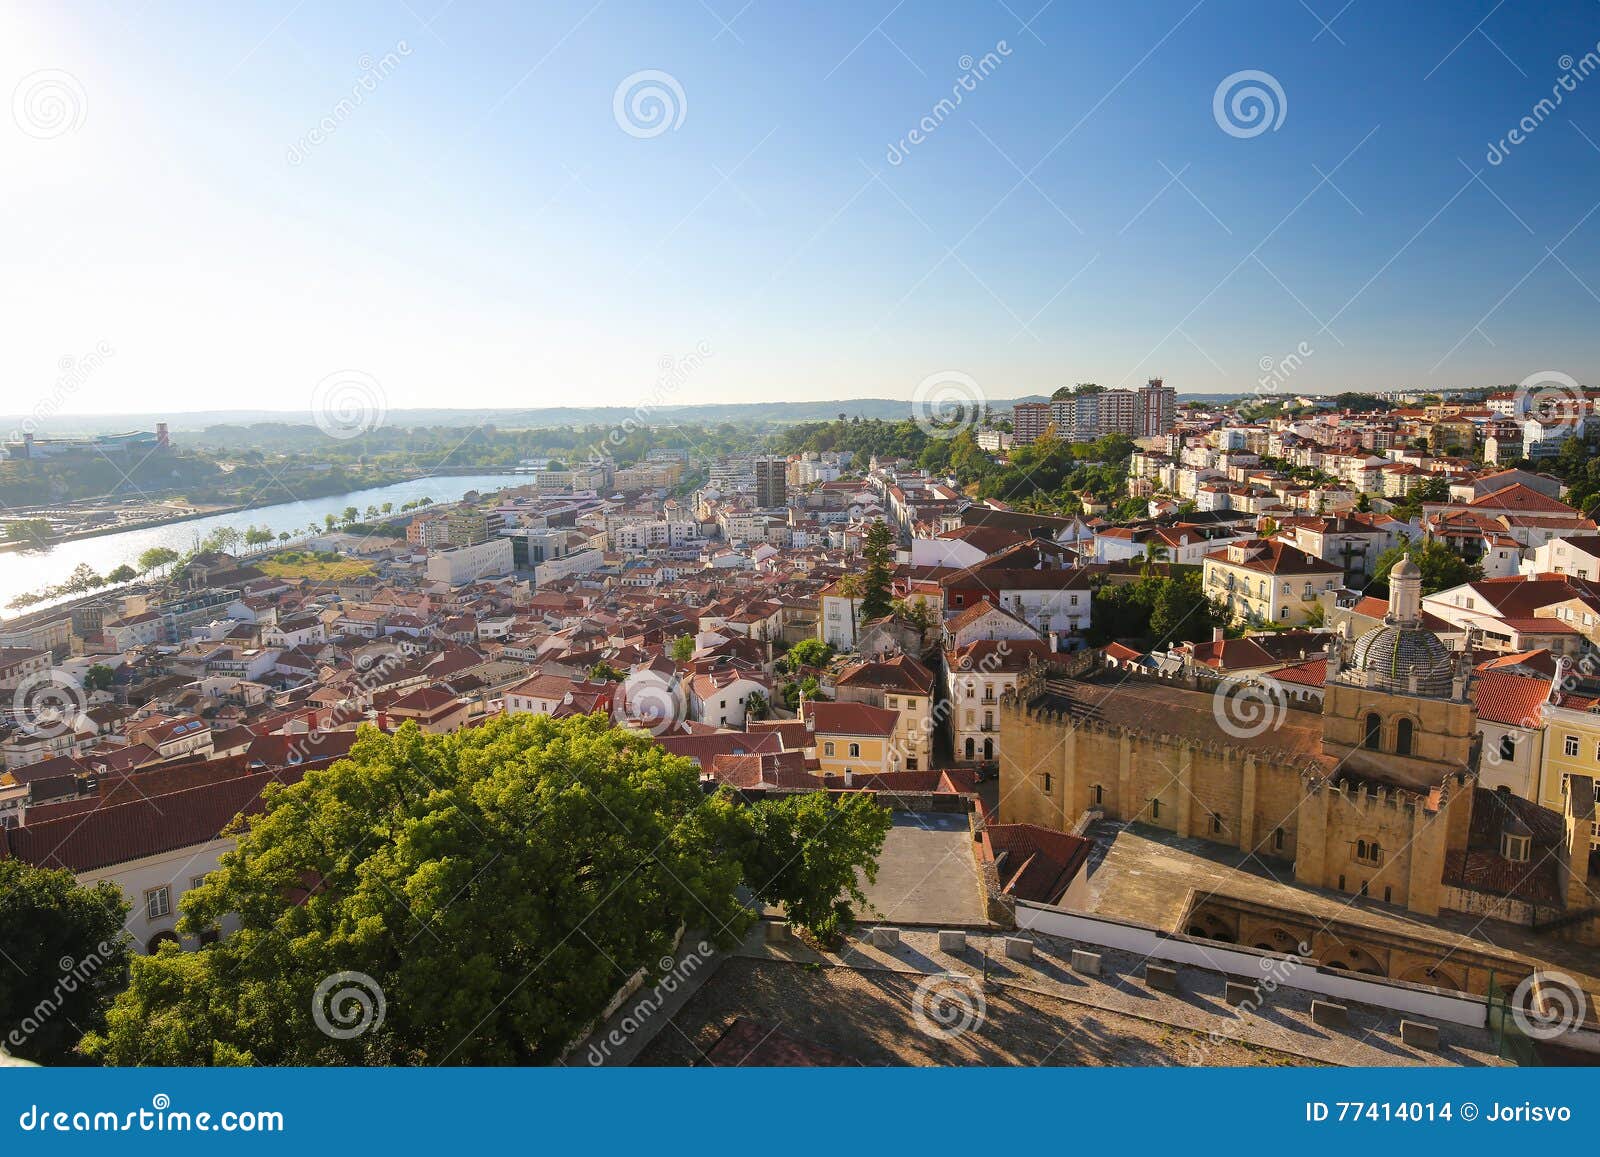 view on the historic center of coimbra, portugal